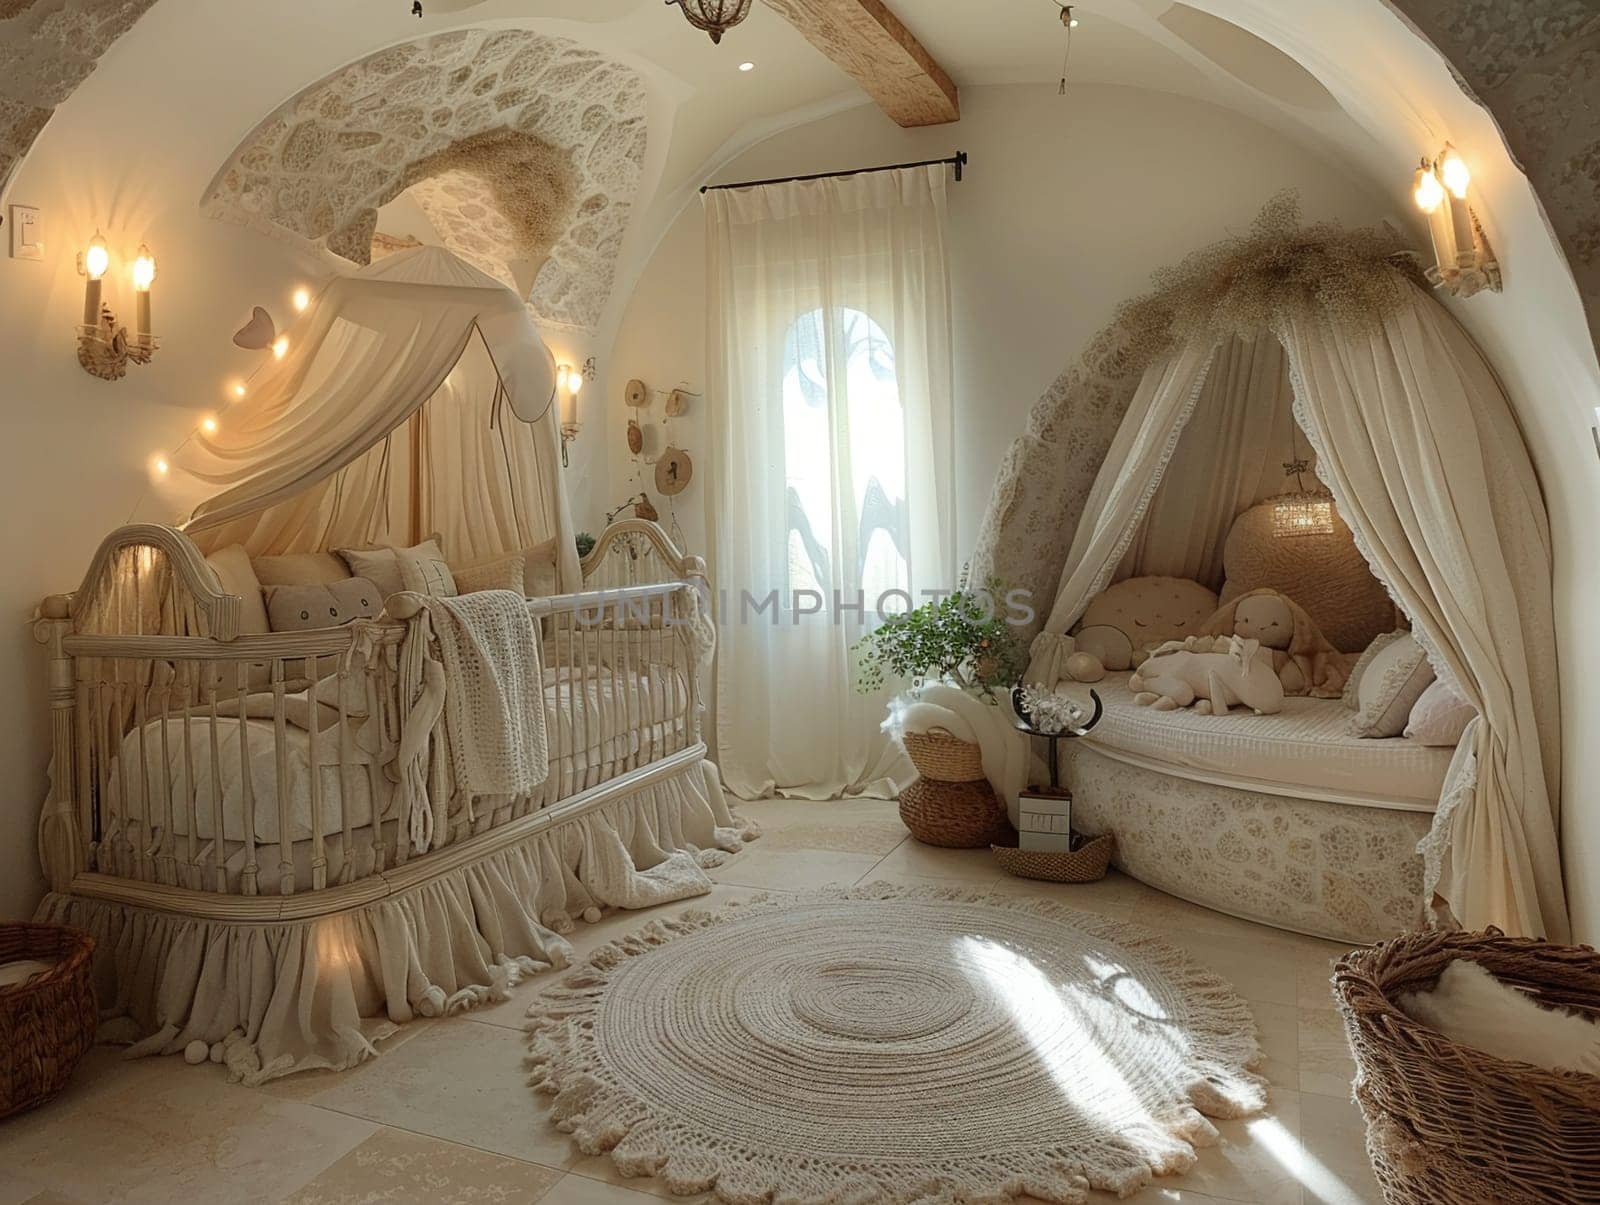 Whimsical fairy tale-themed nursery with magical accents and soft colors by Benzoix